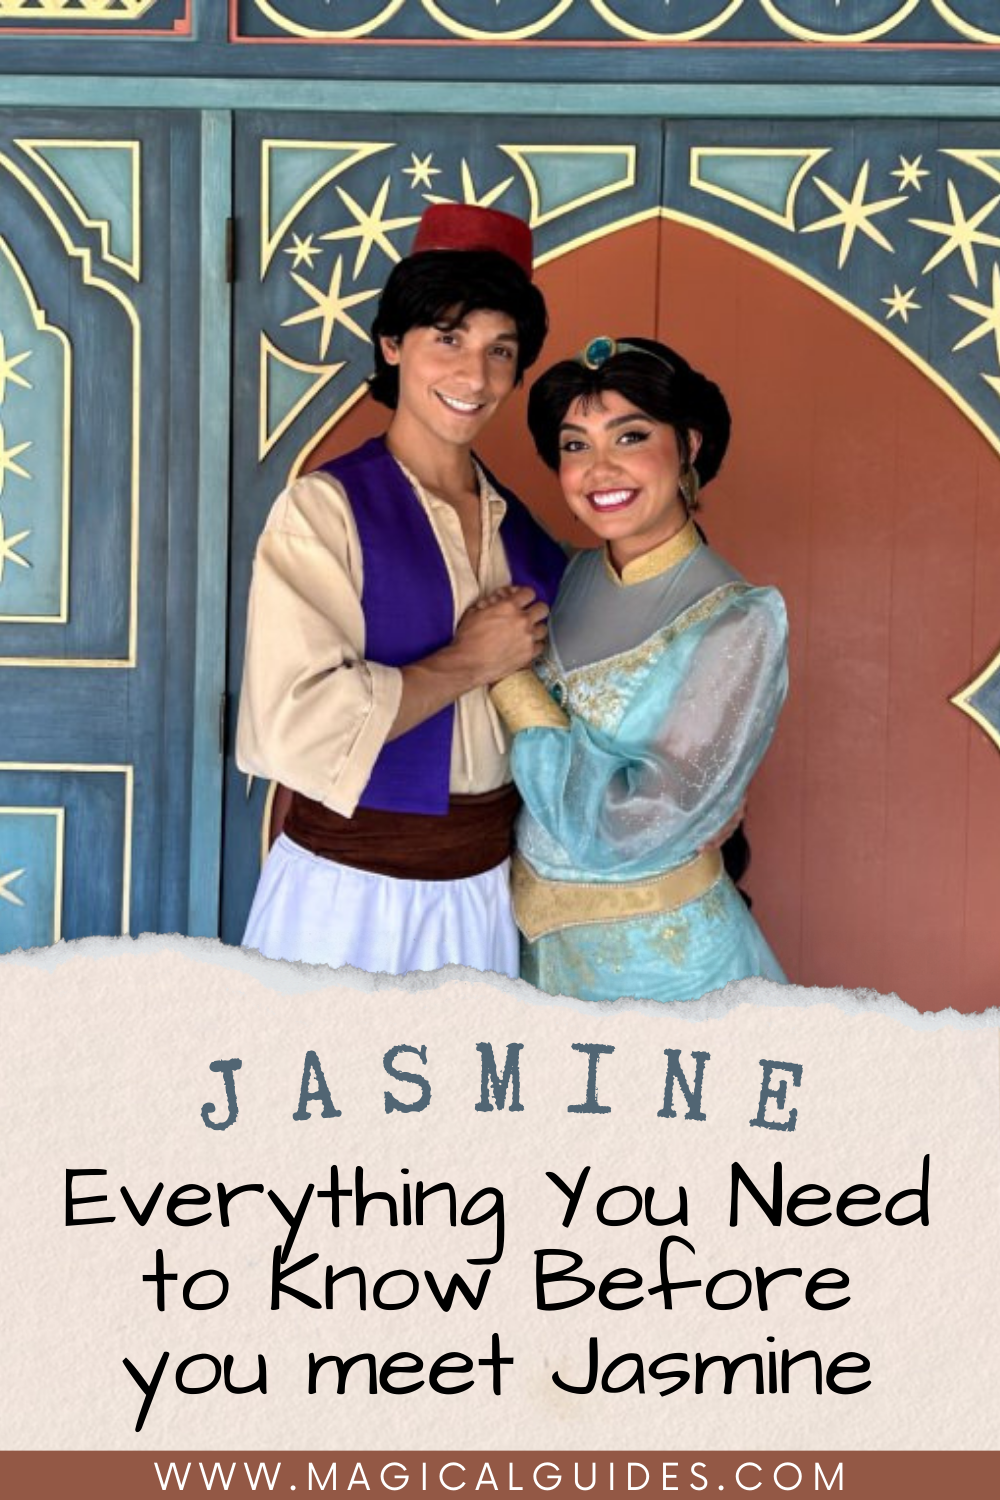 There are many places Aladdin fans can meet Princess Jasmine at Disney World. Find where to meet Jasmine and Aladdin at Disney World, Disneybound outfit inspirations, and what to ask her when you get to meet her. A complete guide to meeting Princess Jasmine at Walt Disney World on your next vacation.